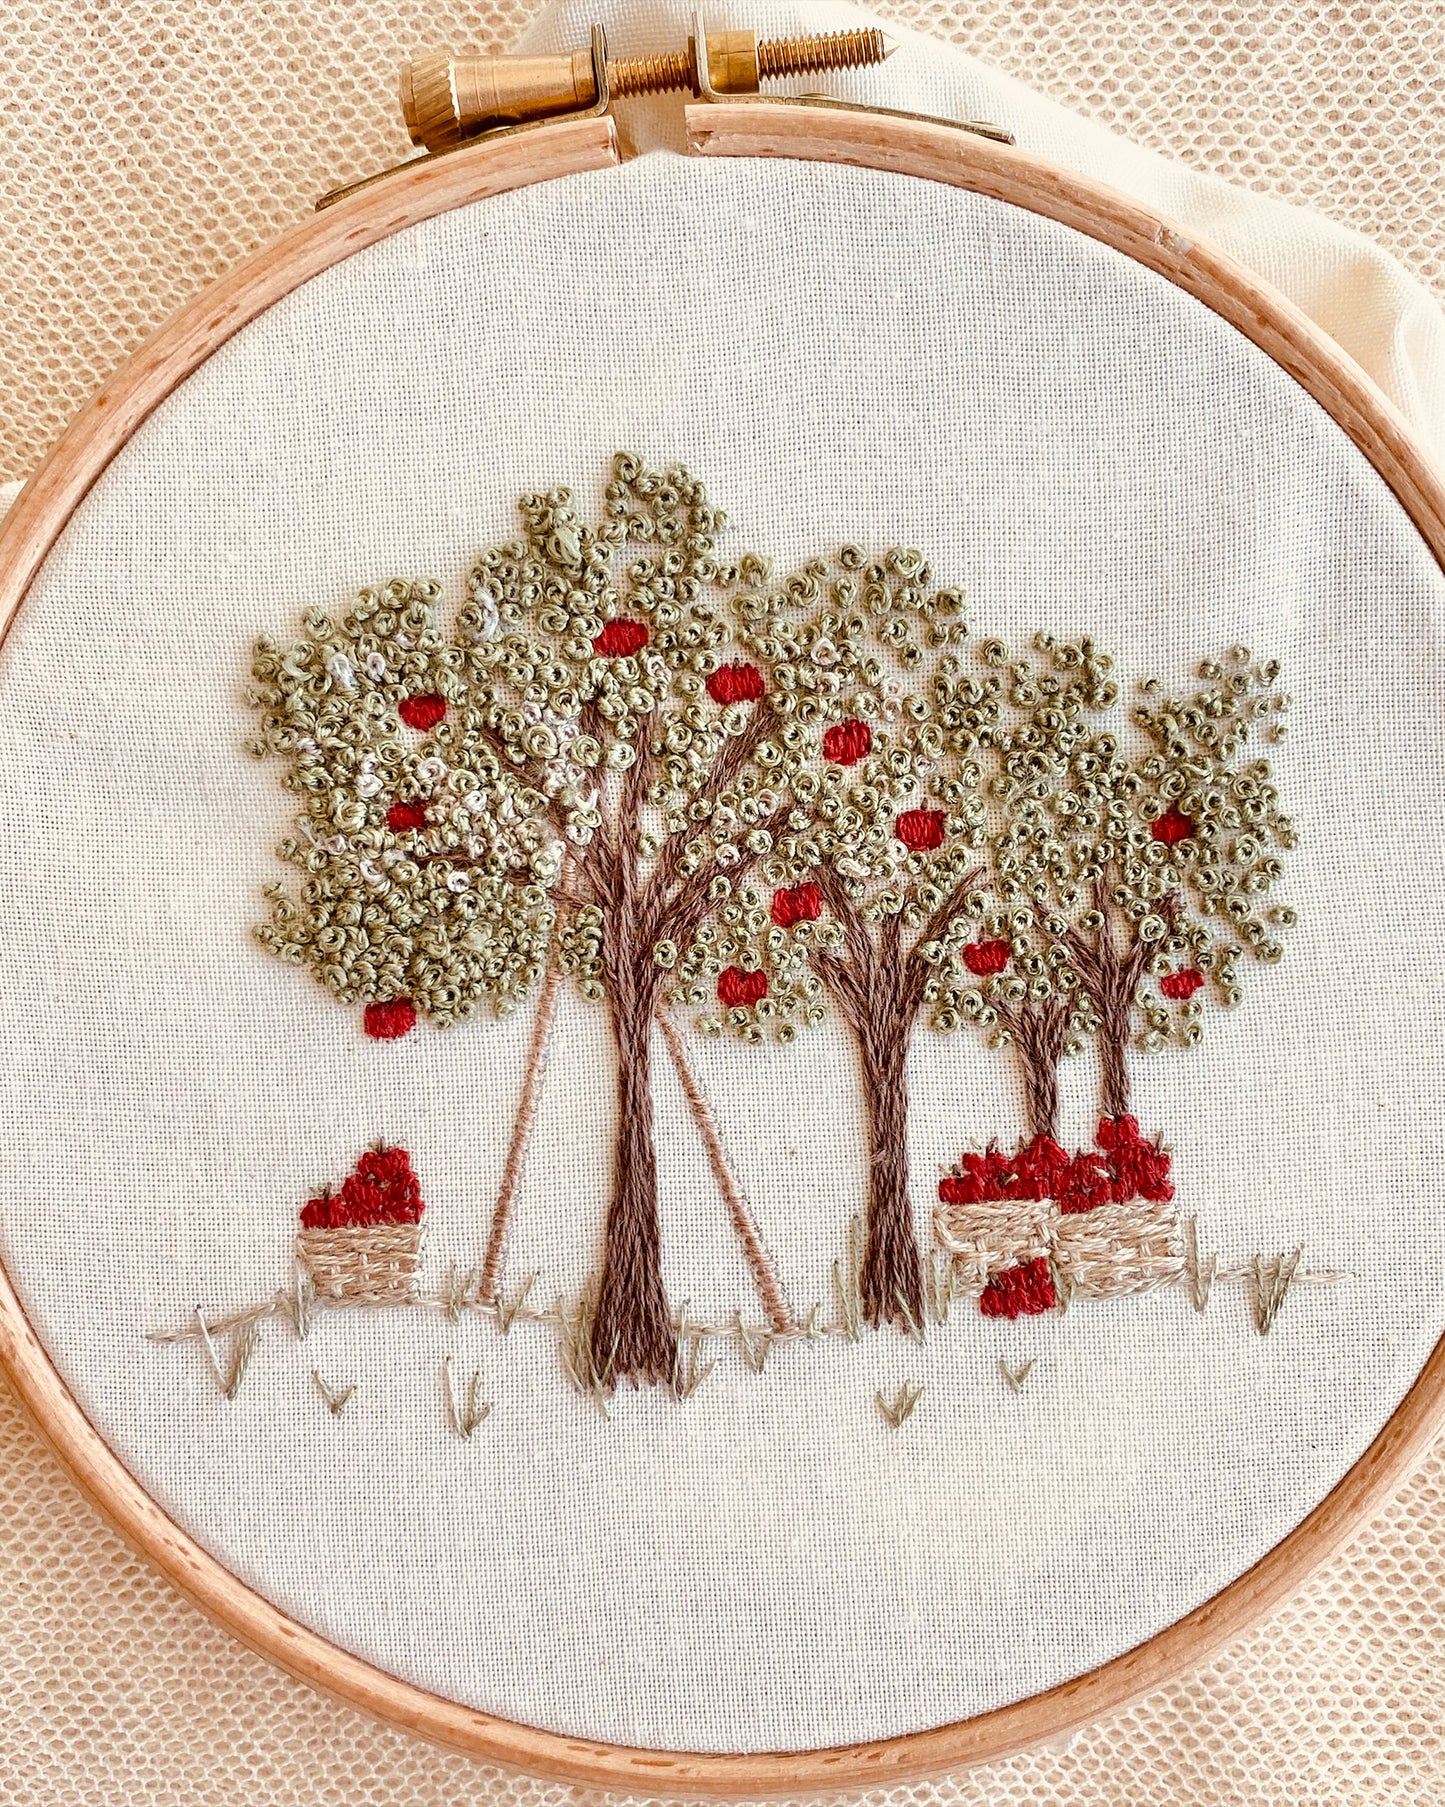 The Apple Orchard Embroidery Kit